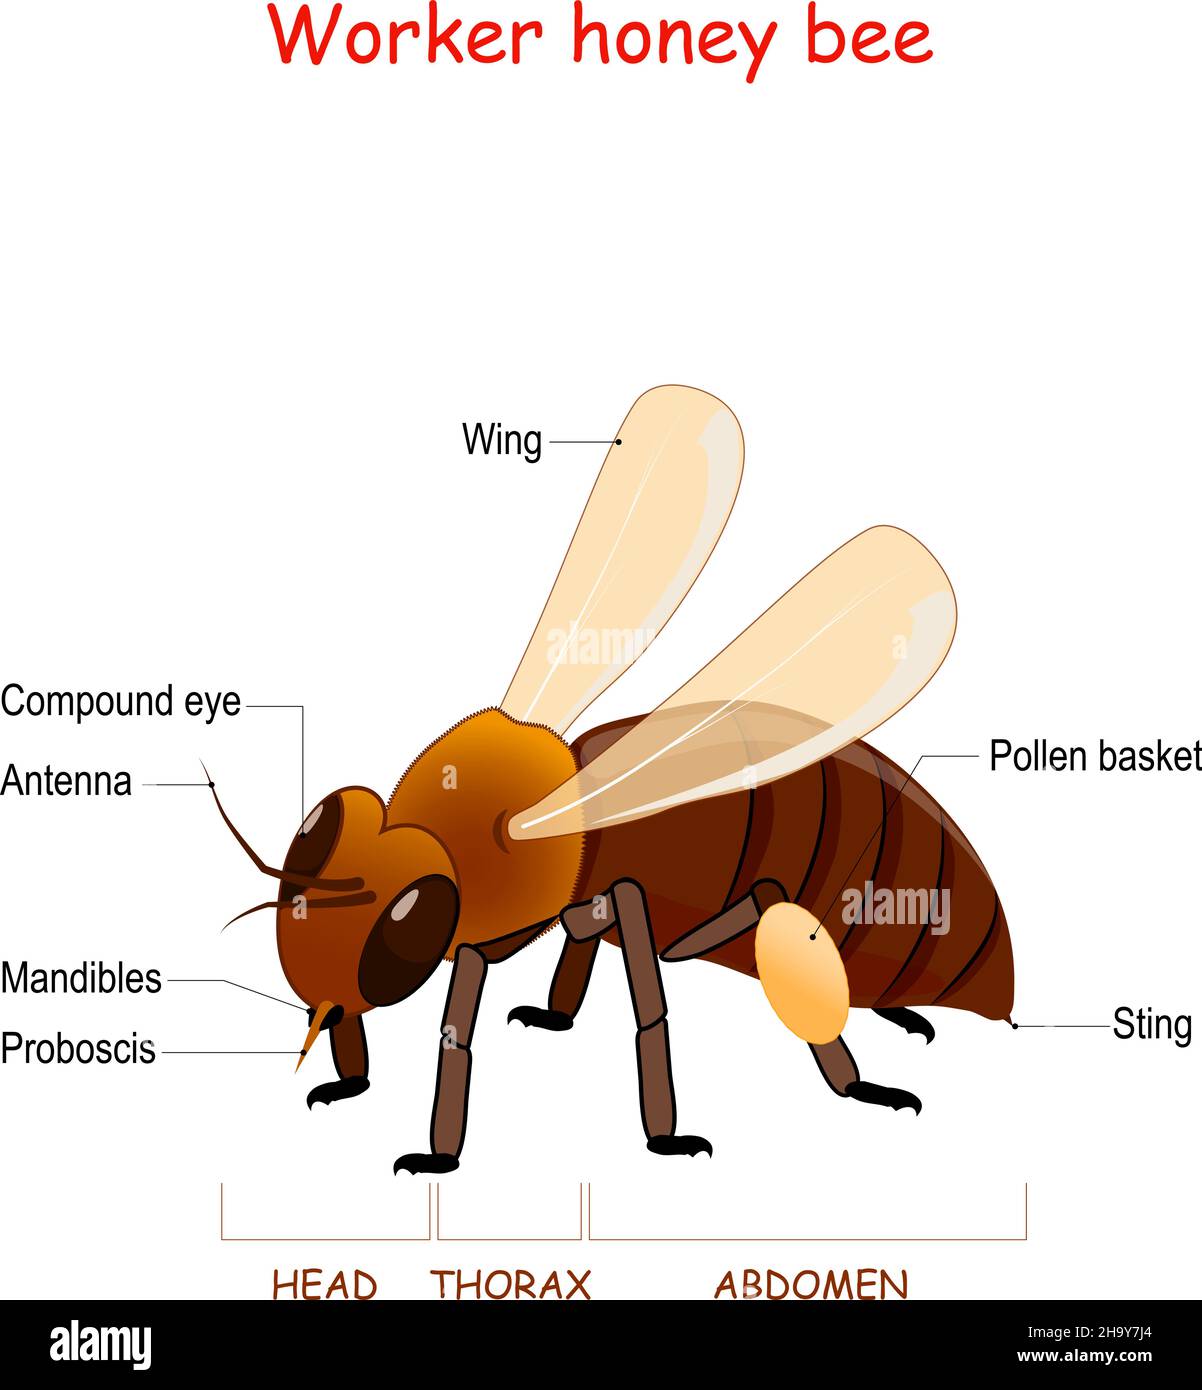 Anatomy of Worker honey bee. Close-up of bee with wings, sting, proboscis, mandibles, pollen basket, and compound eye. Information poster. educational Stock Vector